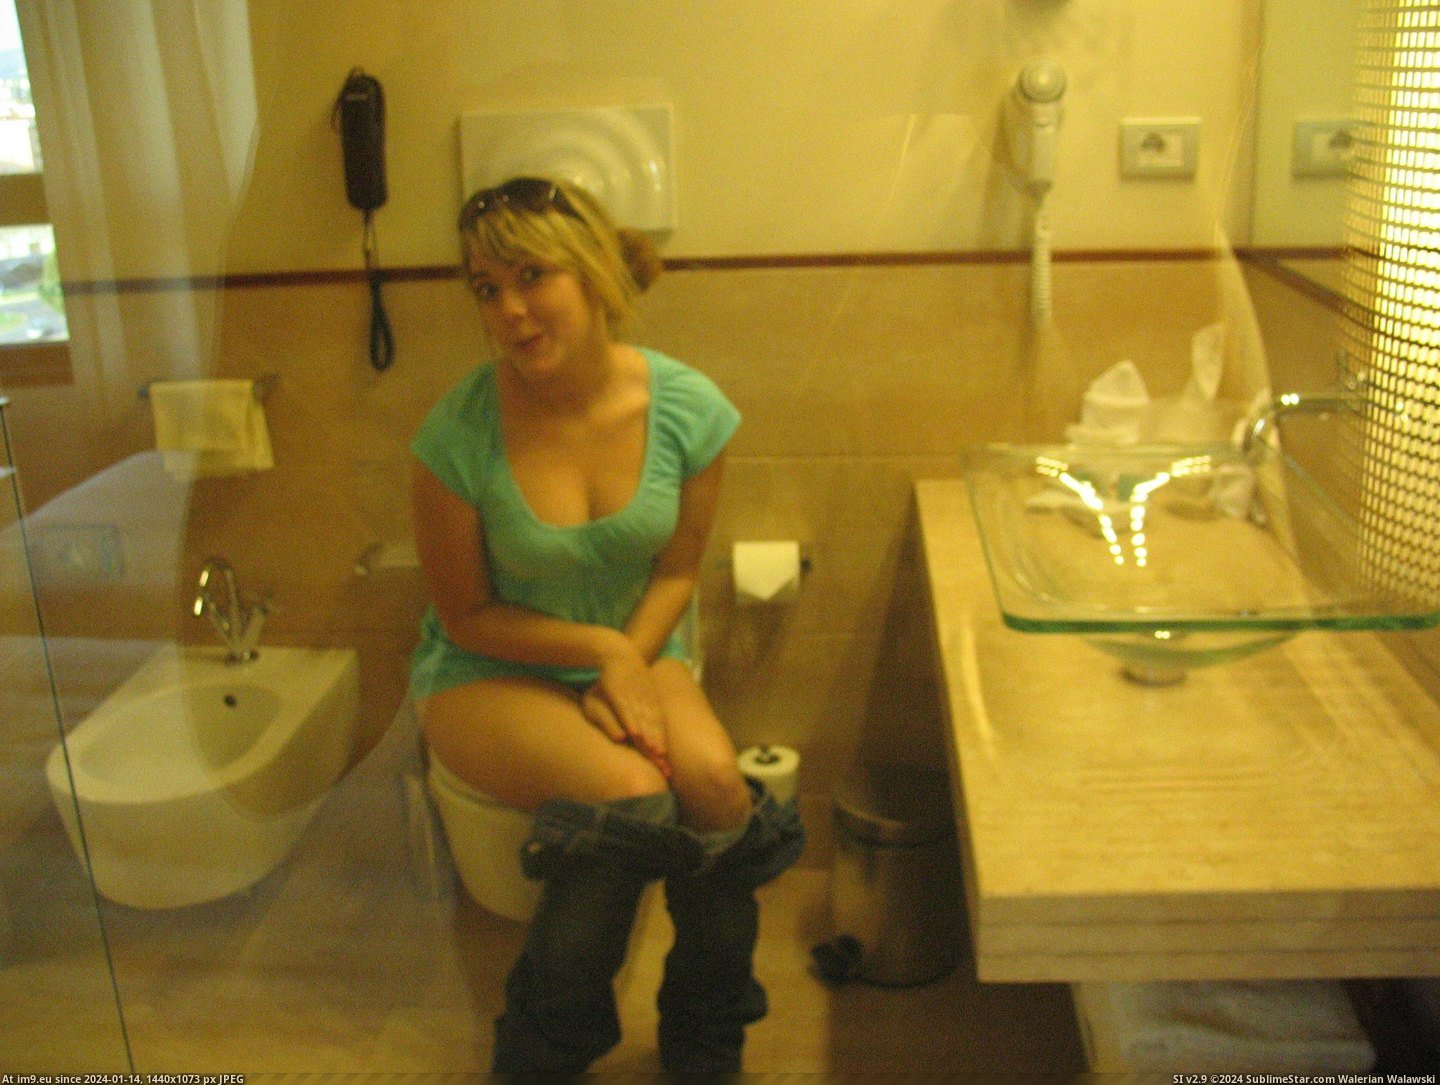 Young Teen Girls Pissing On Toilets 26 (WC toilet bowl peeing porn) (in Teen Girls Pissing Porn (Young Teens Toilet Peeing))